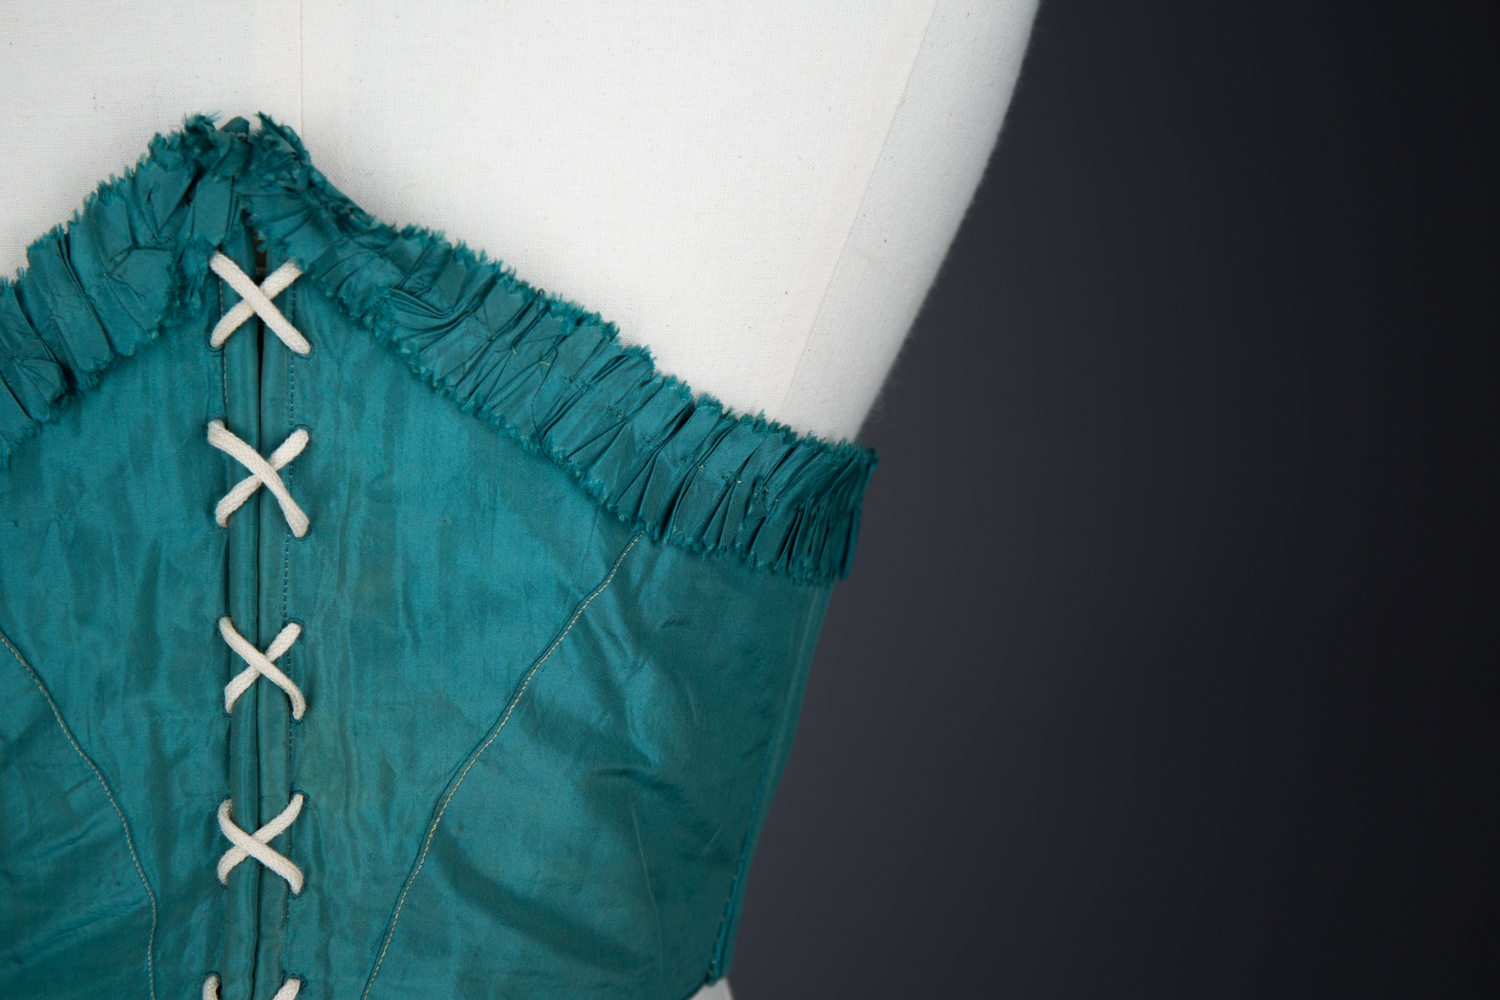 Green Silk Swiss Waist With Ruffled Trim, c. 1860s, USA. The Underpinnings Museum. Photography by Tigz Rice